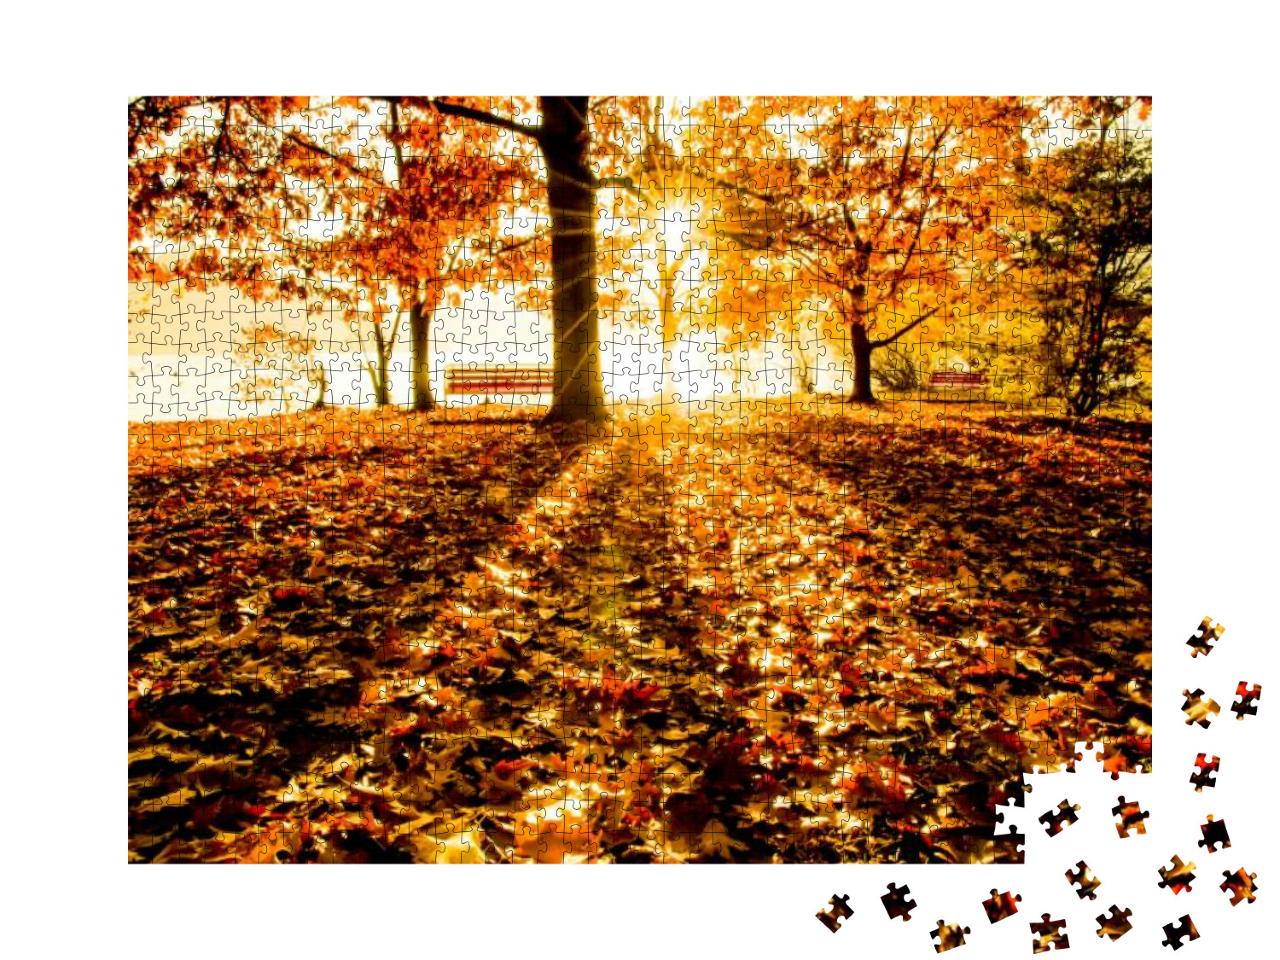 Autumn Trees & Bench on the Waterfront with Sunlight in A... Jigsaw Puzzle with 1000 pieces